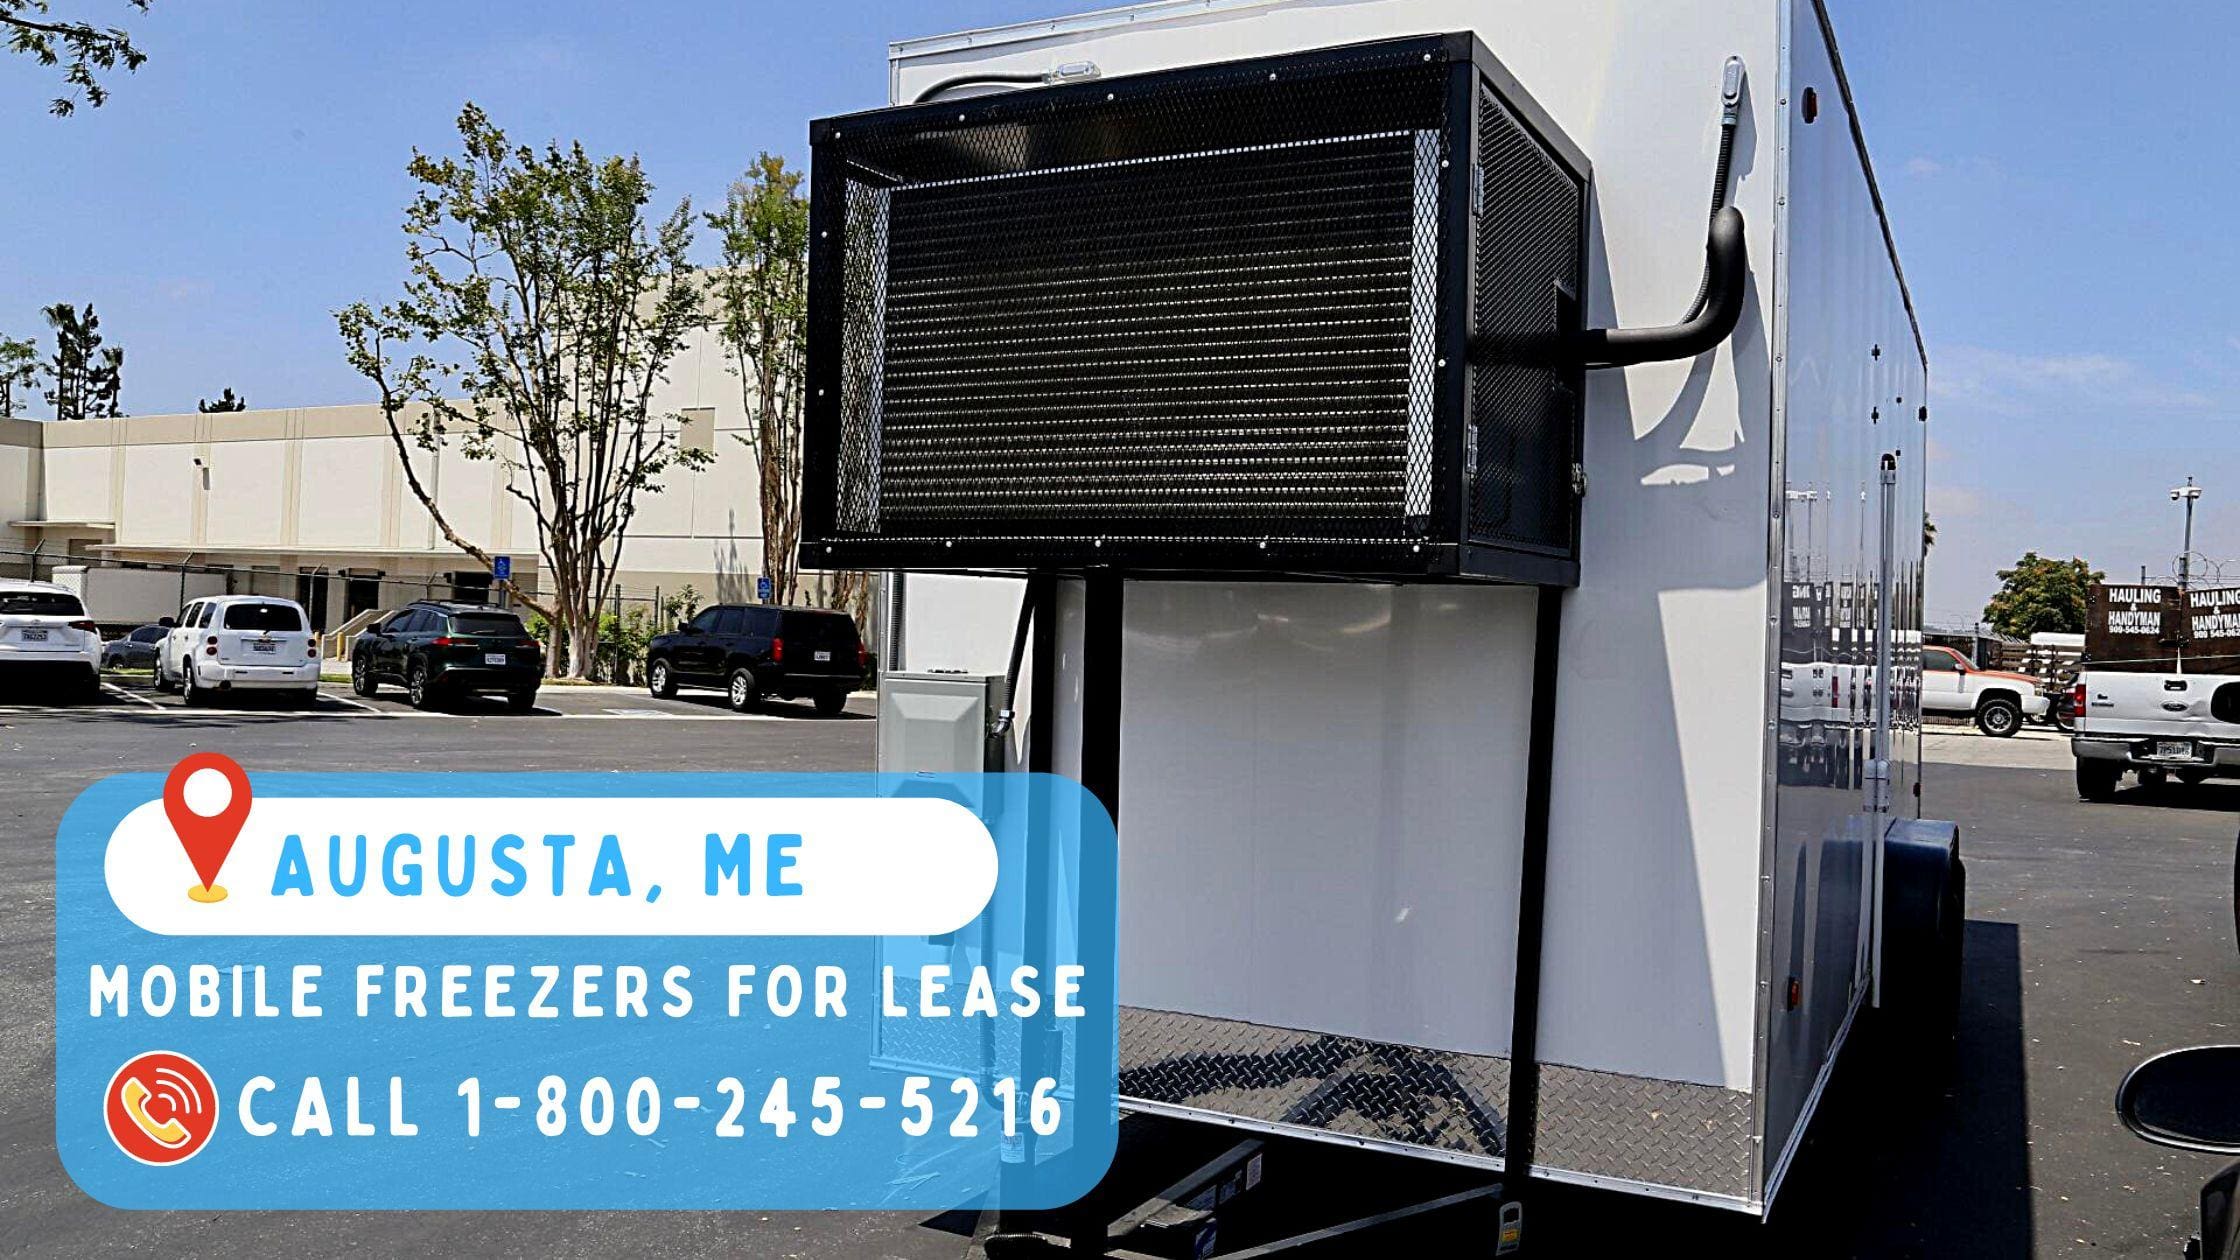 Mobile Freezers for Lease in Augusta, ME